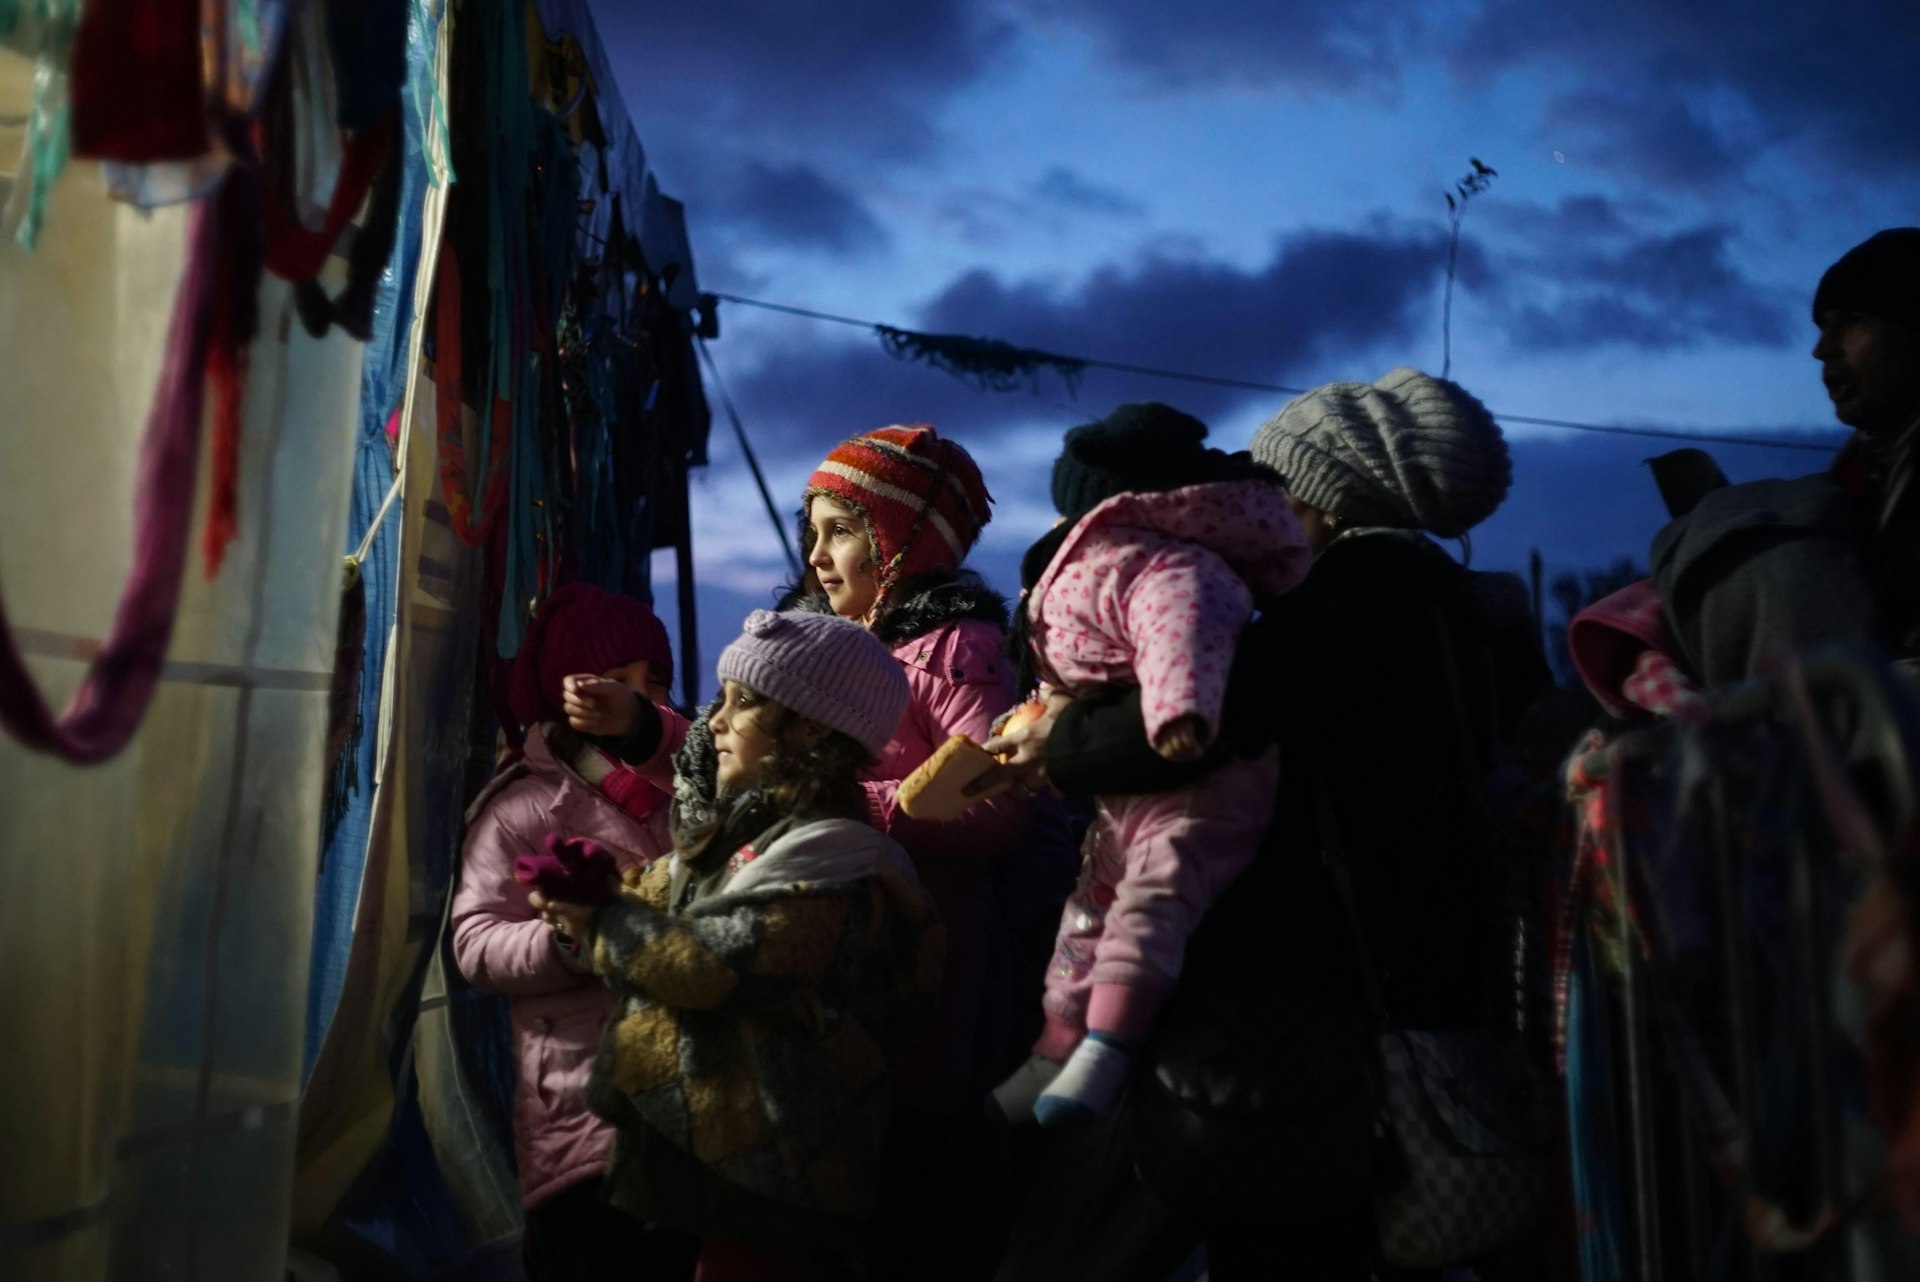 In Pictures: The humanitarian catastrophe at Europe's frontier